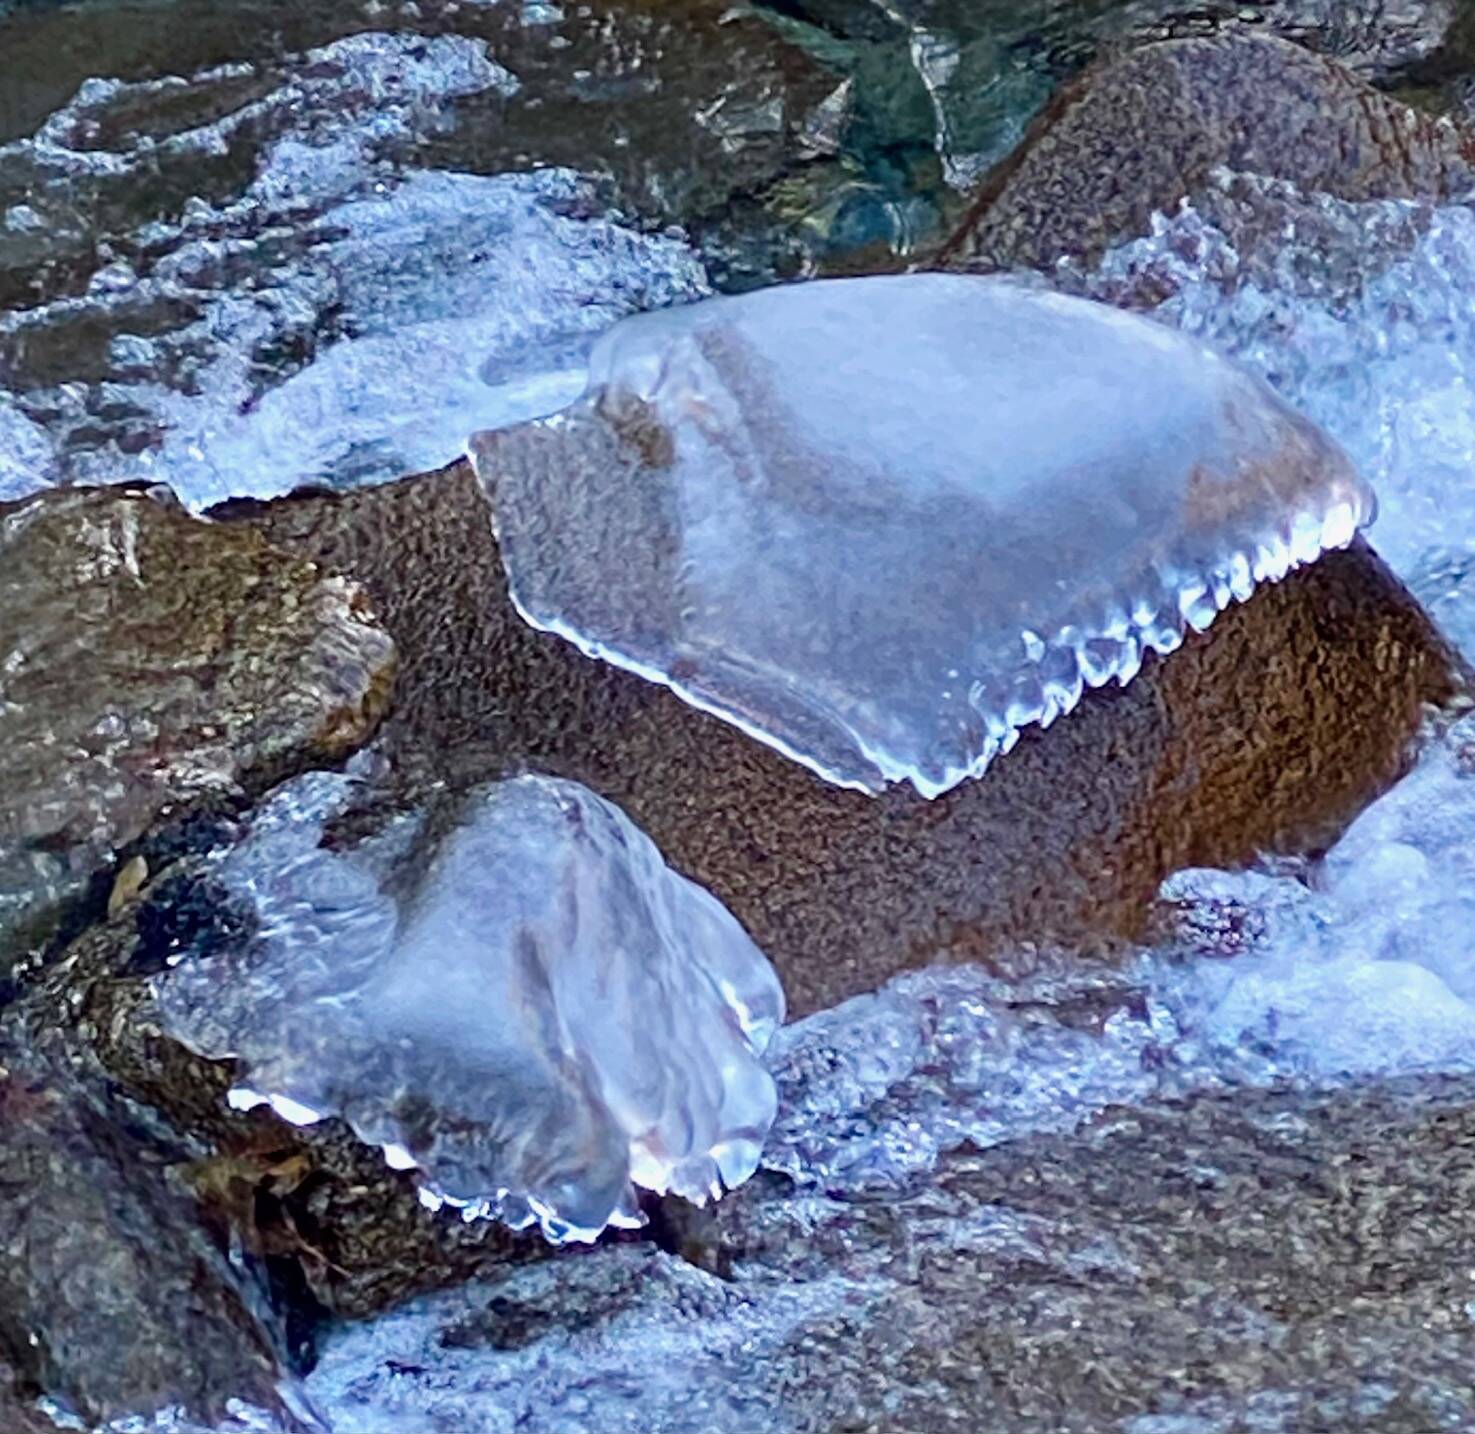 Gold Creek rocks wear icy blankets as temperatures drop on Oct. 25. (Photo by Denise Carroll)